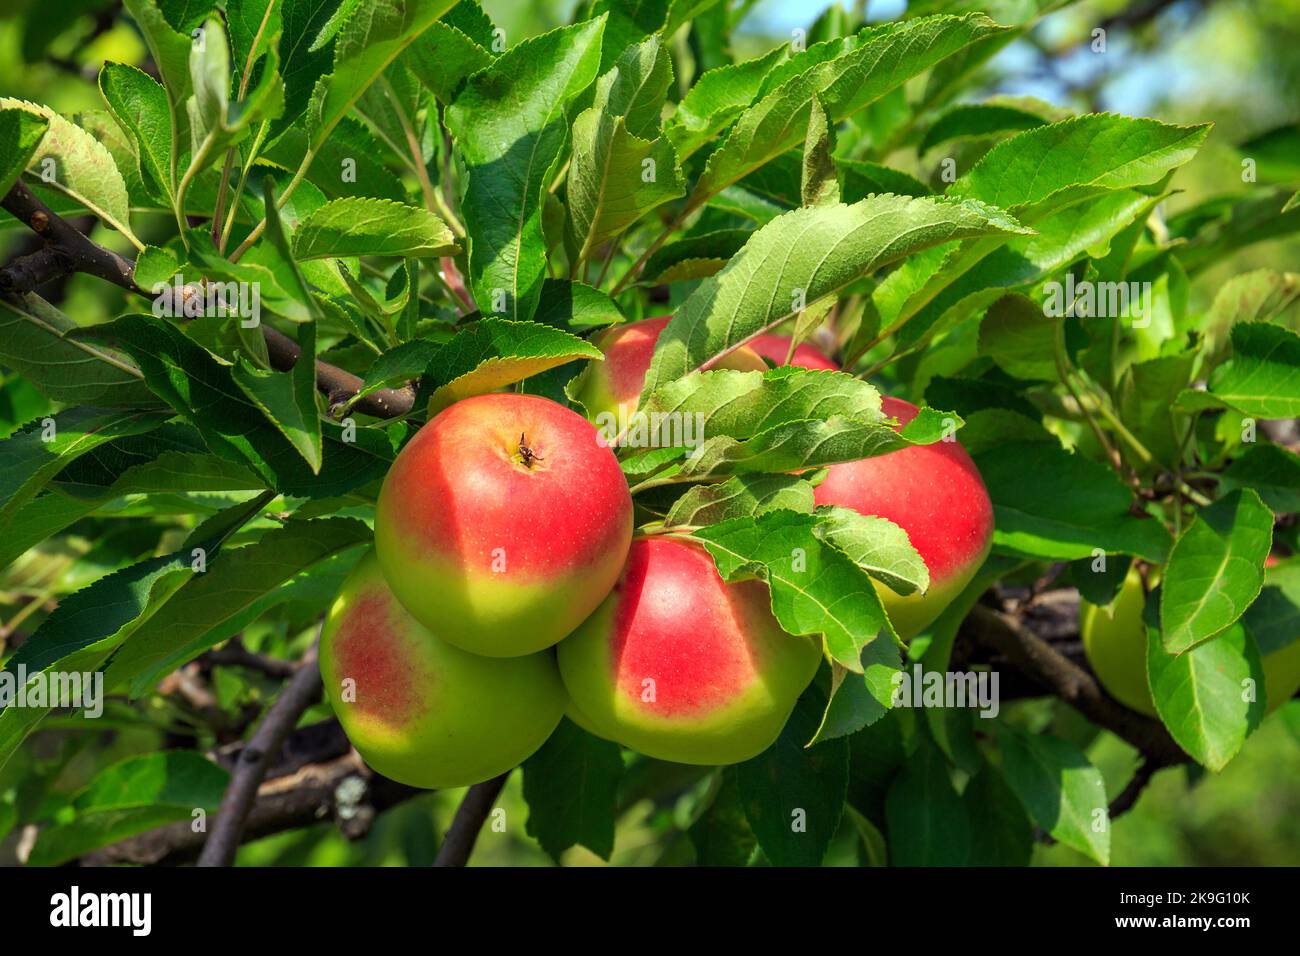 Apple branch with ripe juicy fruits Stock Photo